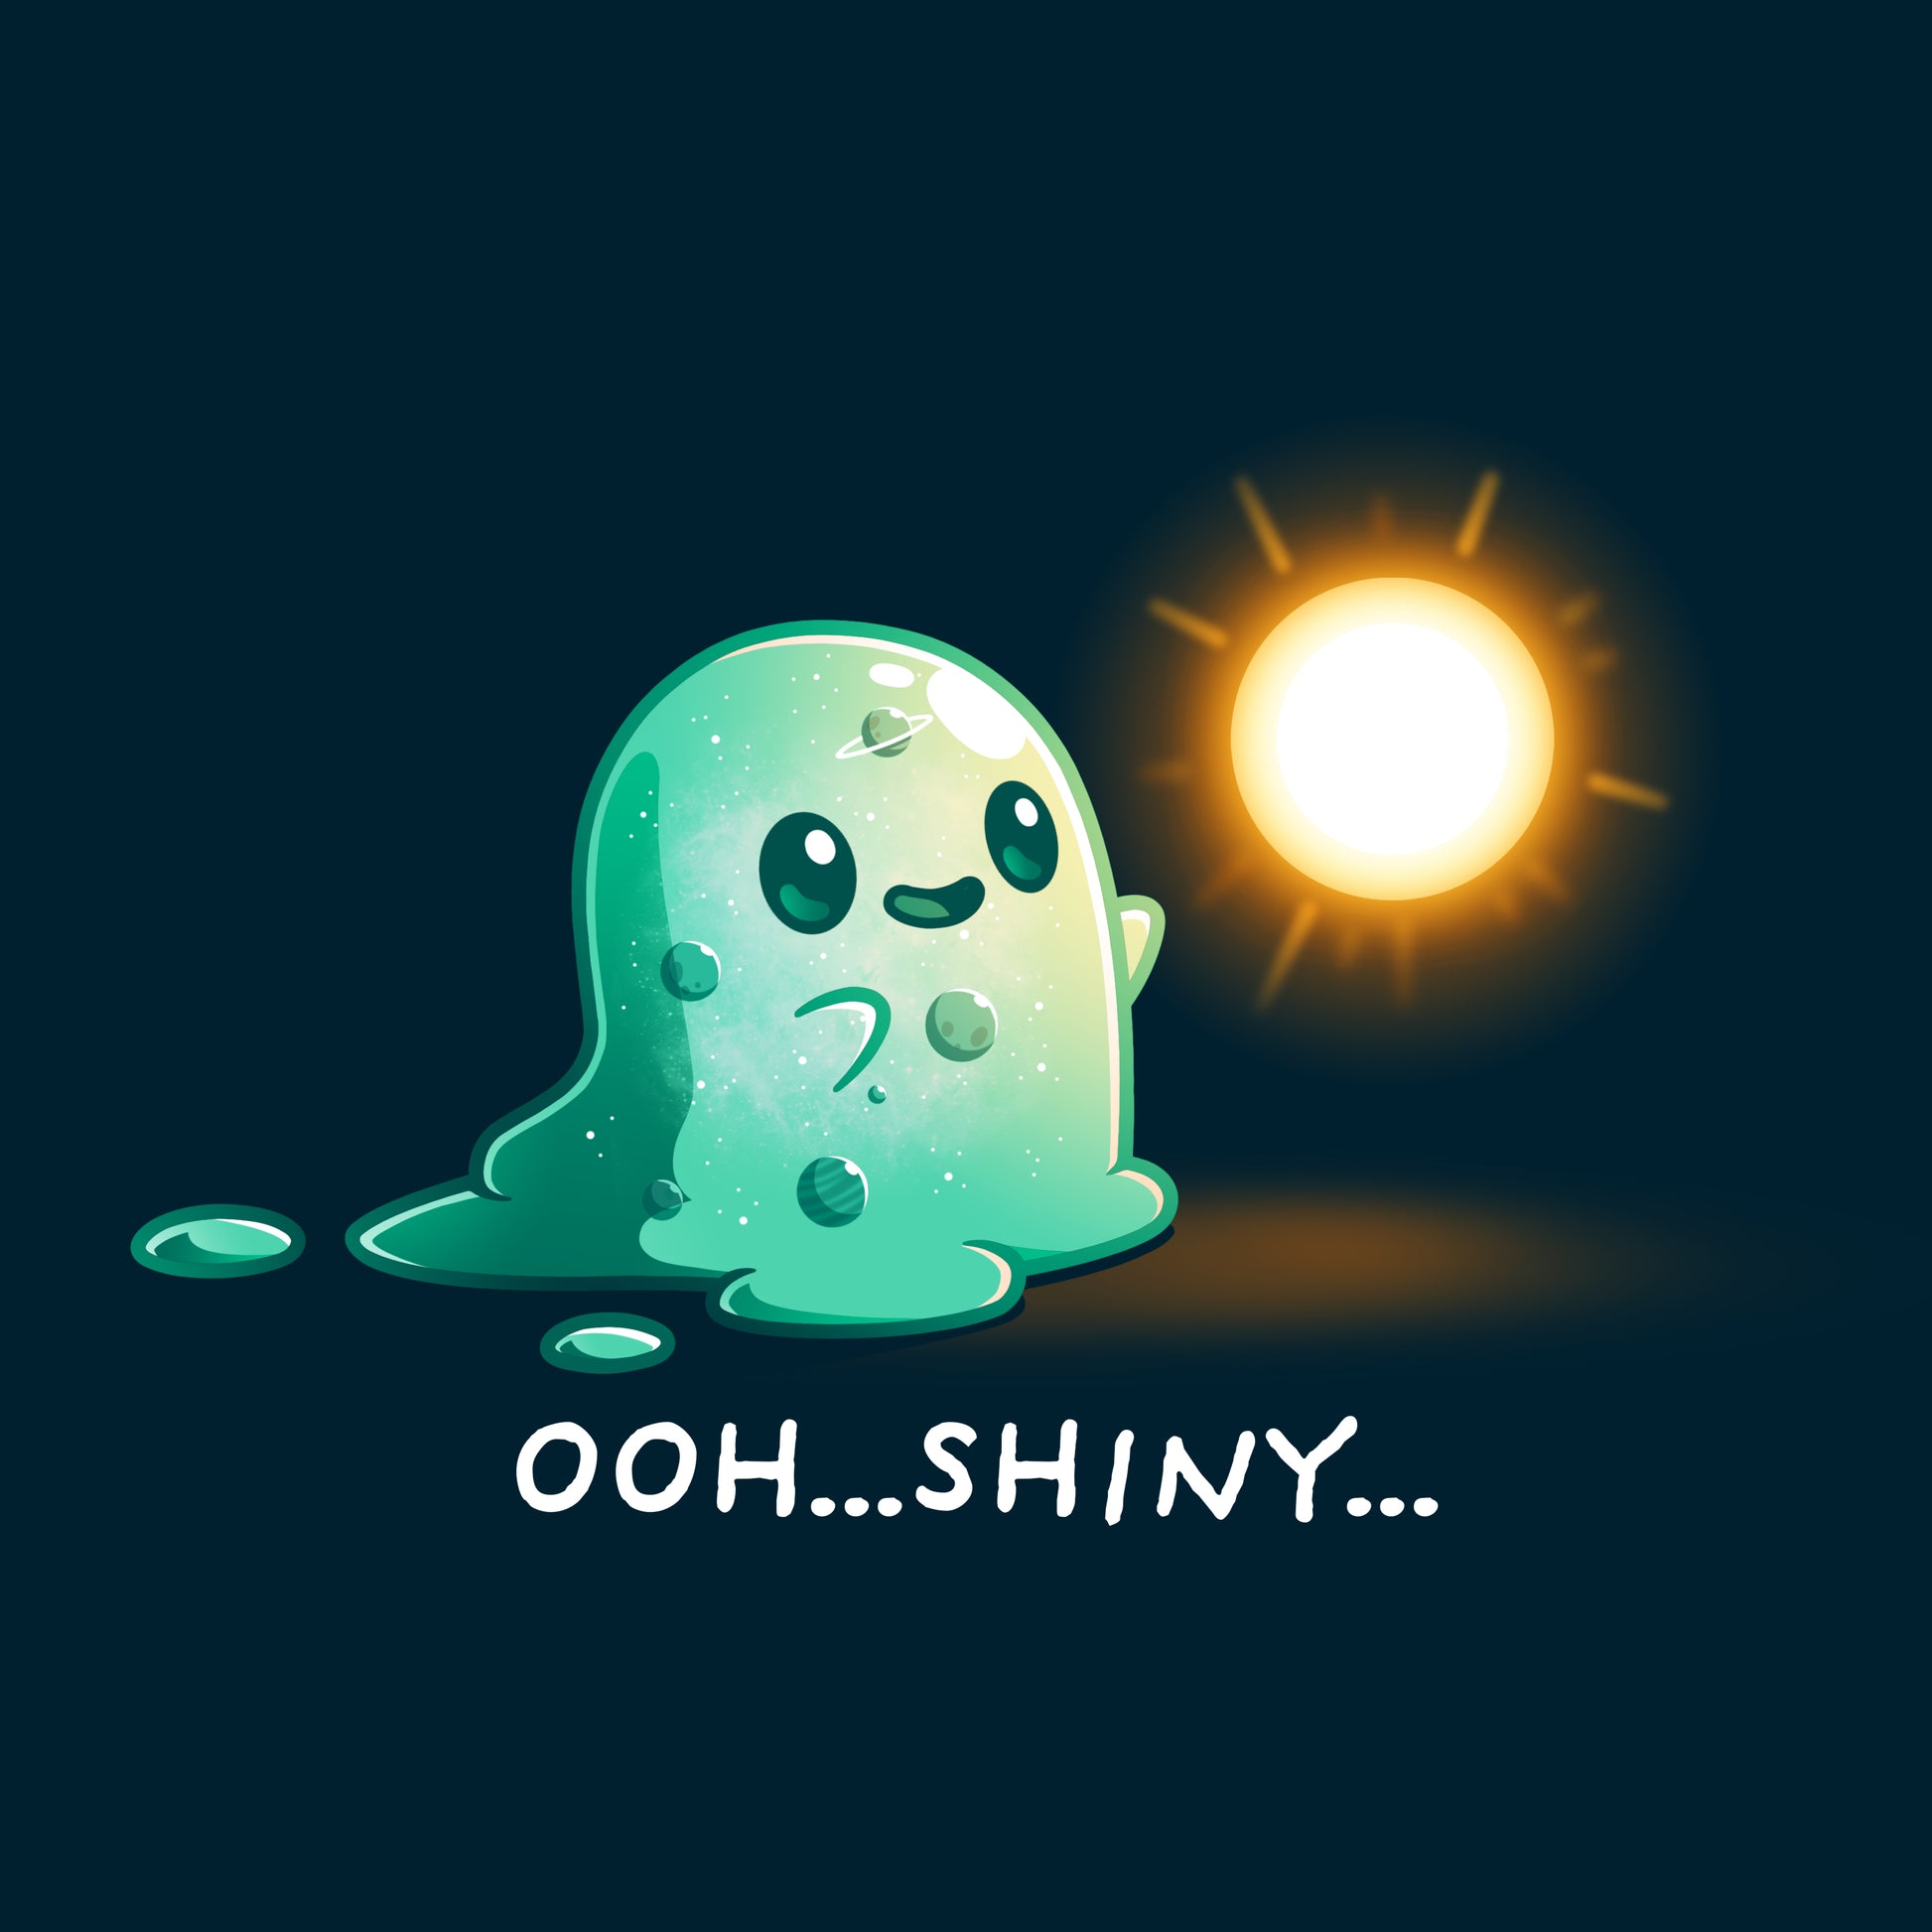 Illustration of a cute, green, translucent slime creature staring in awe at a glowing, golden orb on a Navy Blue T-shirt featuring the Shiny Distraction by monsterdigital, with the text "ooh...shiny..." above it.